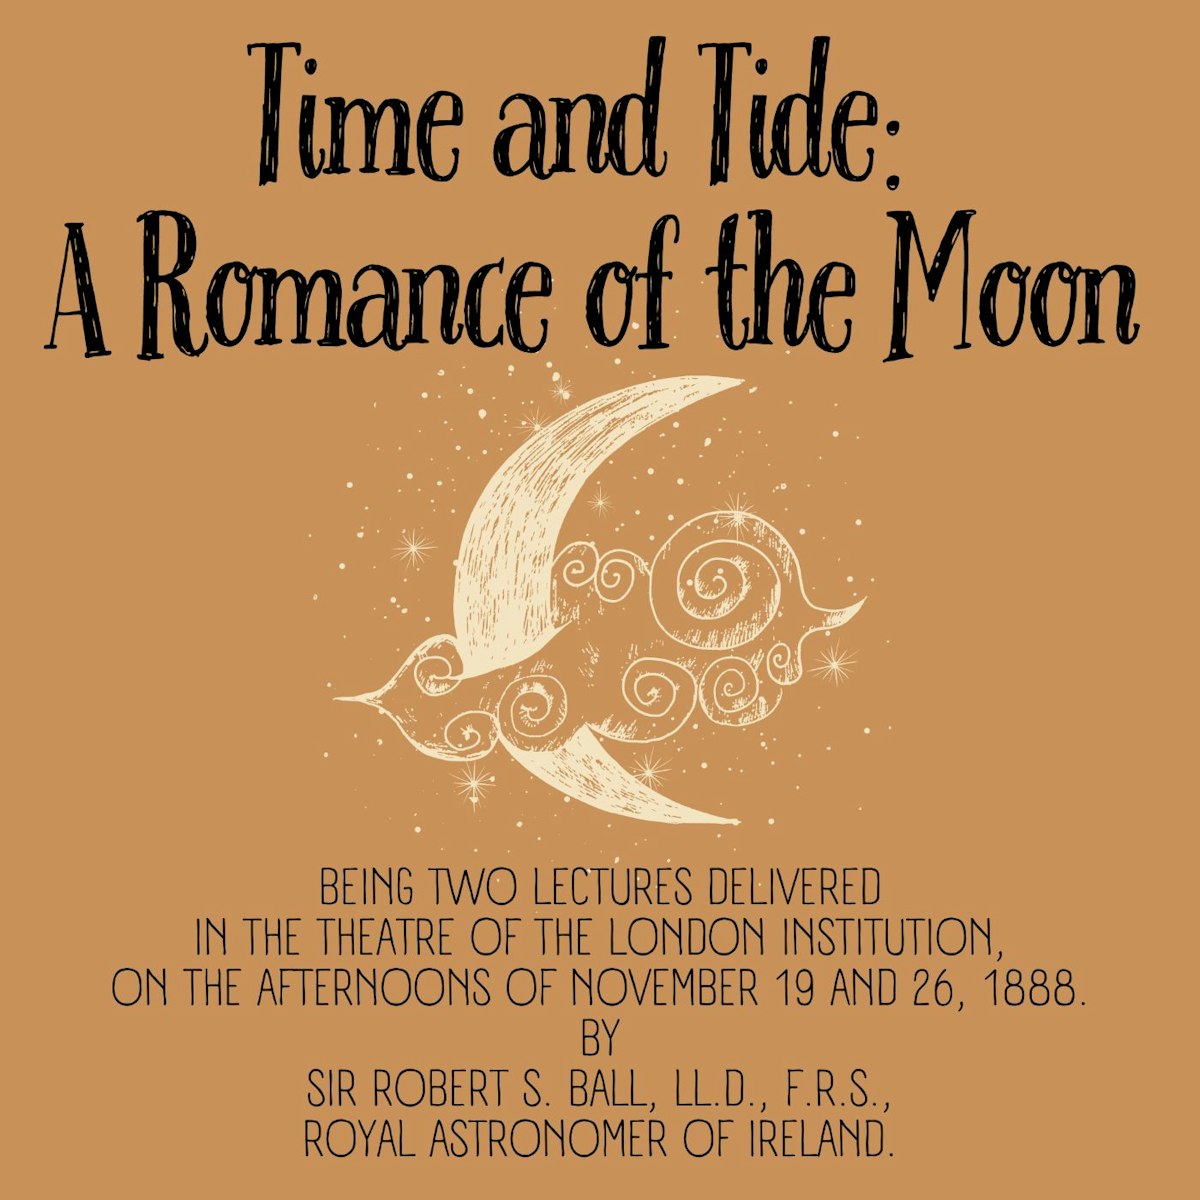 featured image - Time and Tide: A Romance of the Moon by Robert S. Ball - Table of Links